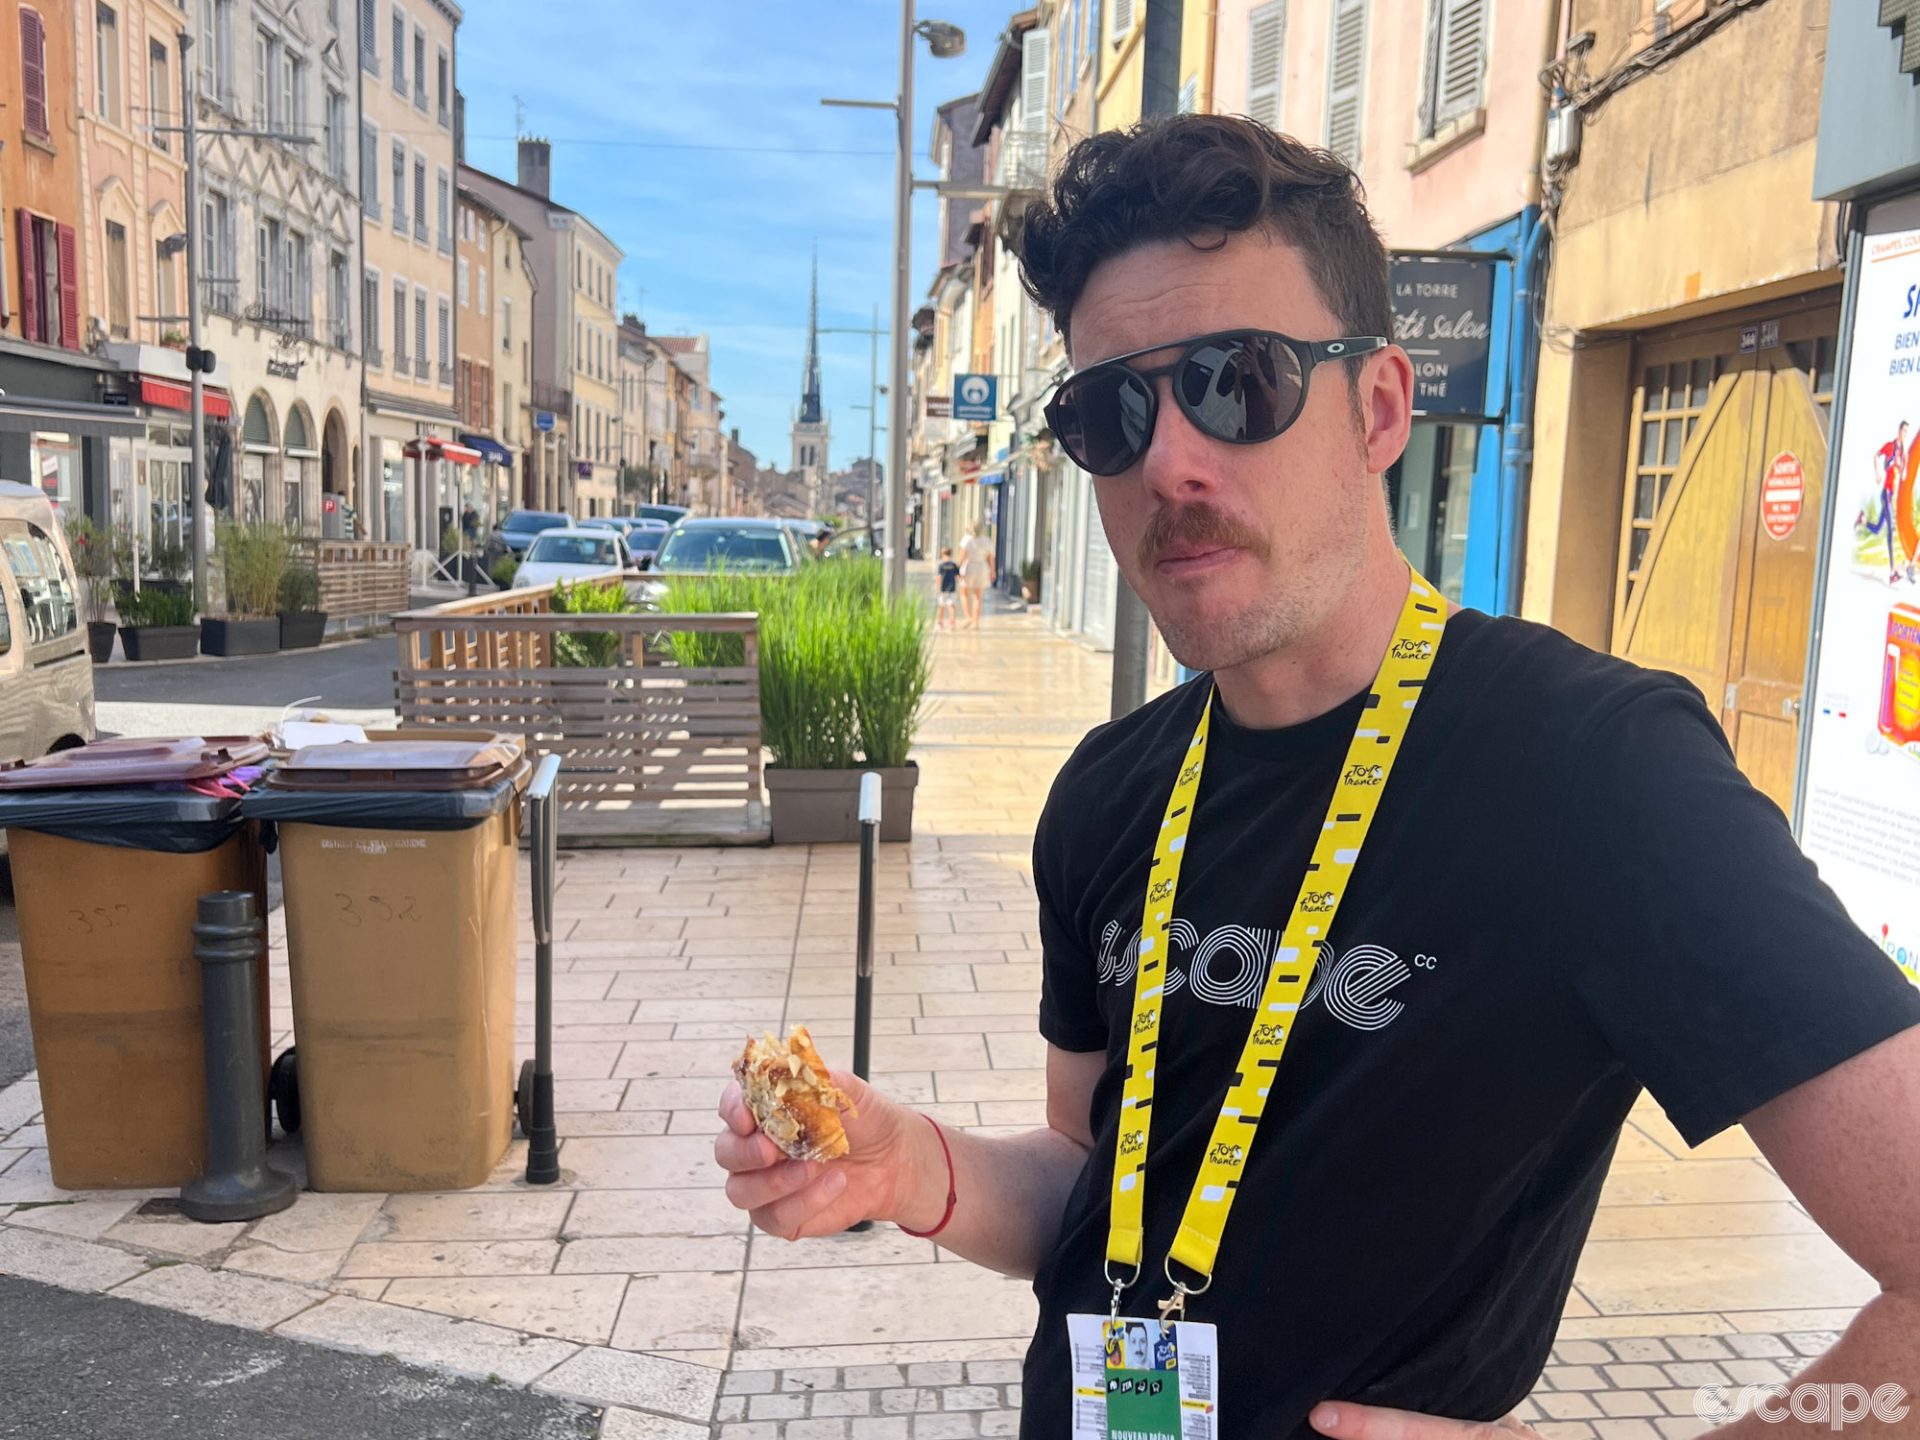 A man who may or may not be Escape's own Iain Treloar enjoys a sandwich on a random street in France. He is wearing very stylish Oakley sunglasses and a black Escape t-shirt and has a bemused expression on his face as if to say, "You're not posting this on the web site, are you?"